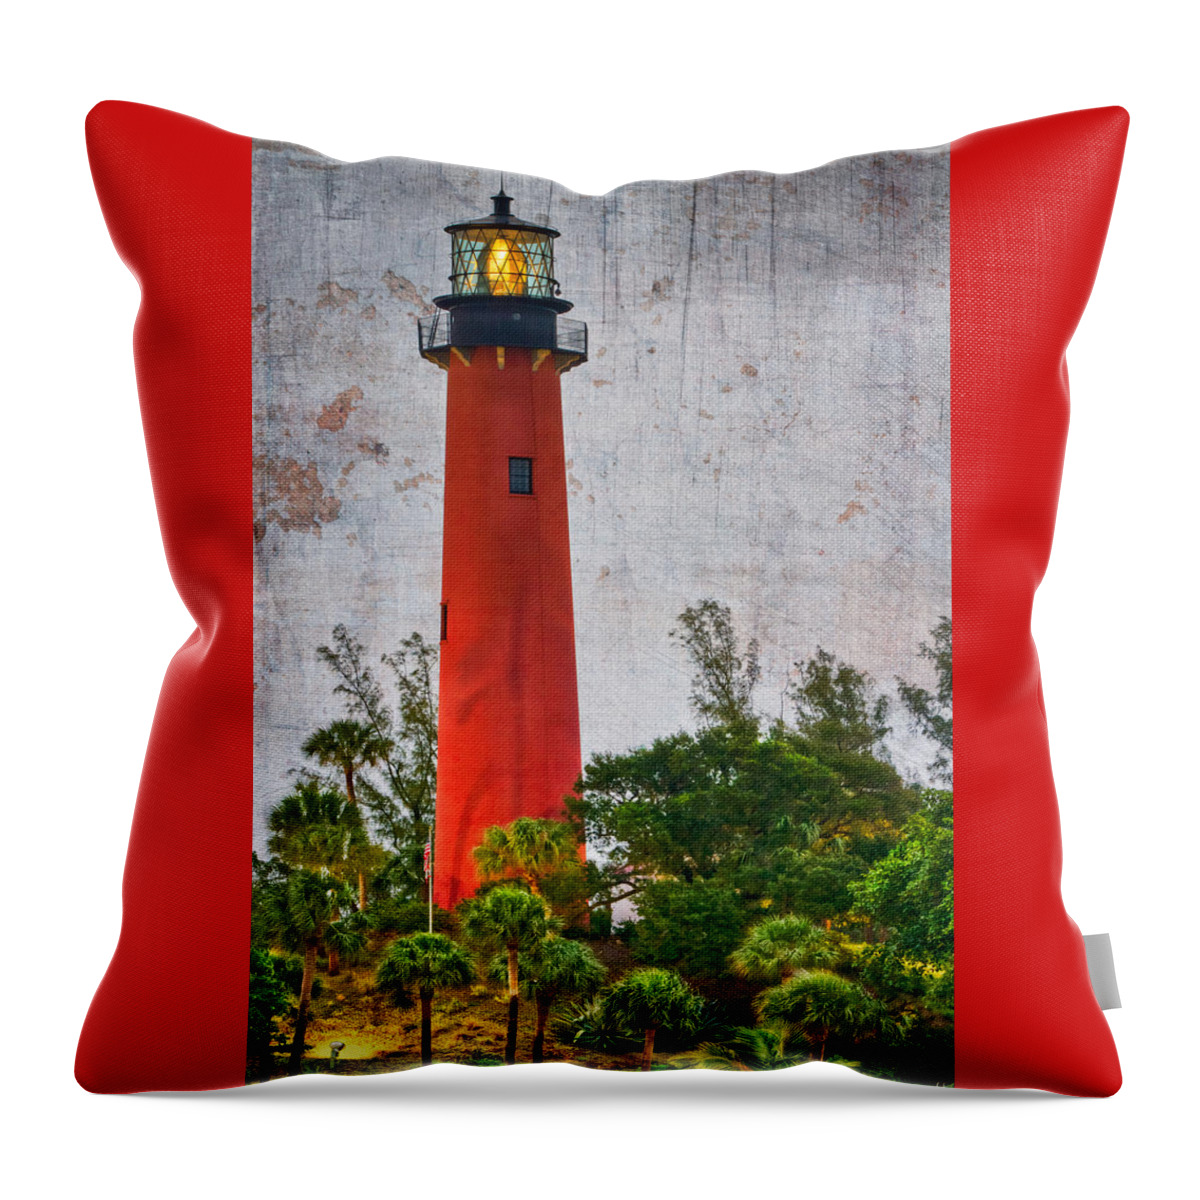 Clouds Throw Pillow featuring the photograph Jupiter Lighthouse by Debra and Dave Vanderlaan